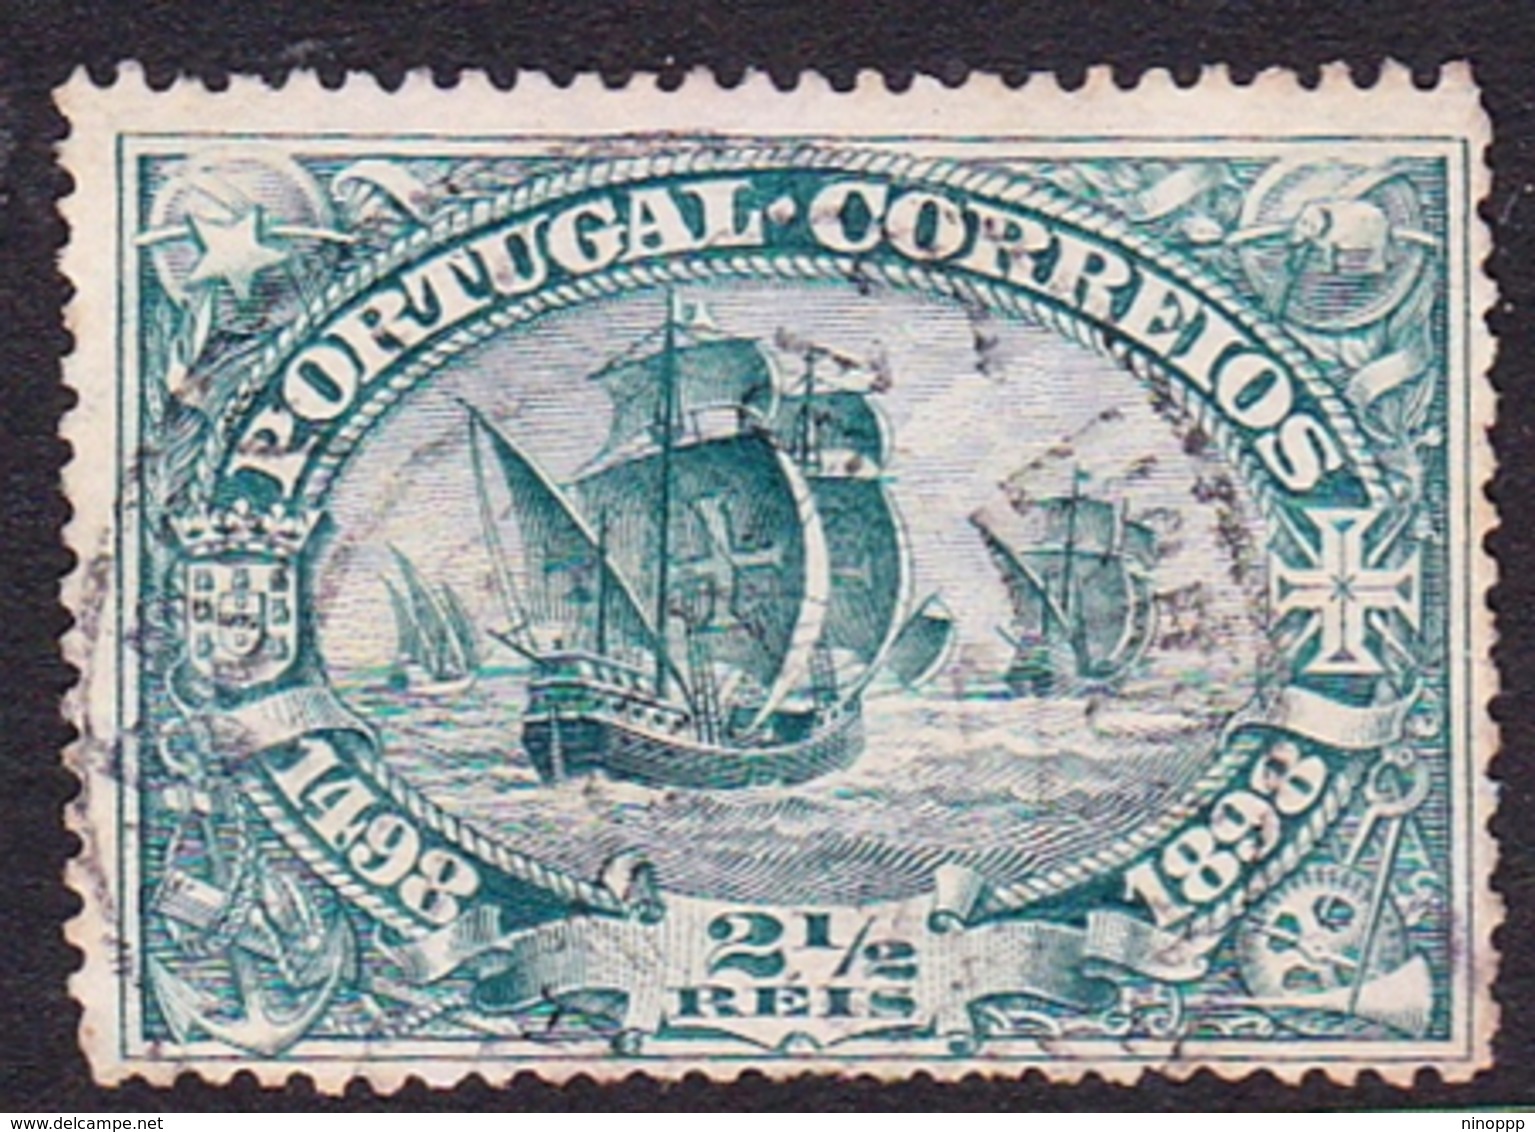 Portugal SG 378 1898 Vasco De Gama, Two And Half Reis, Used - Used Stamps